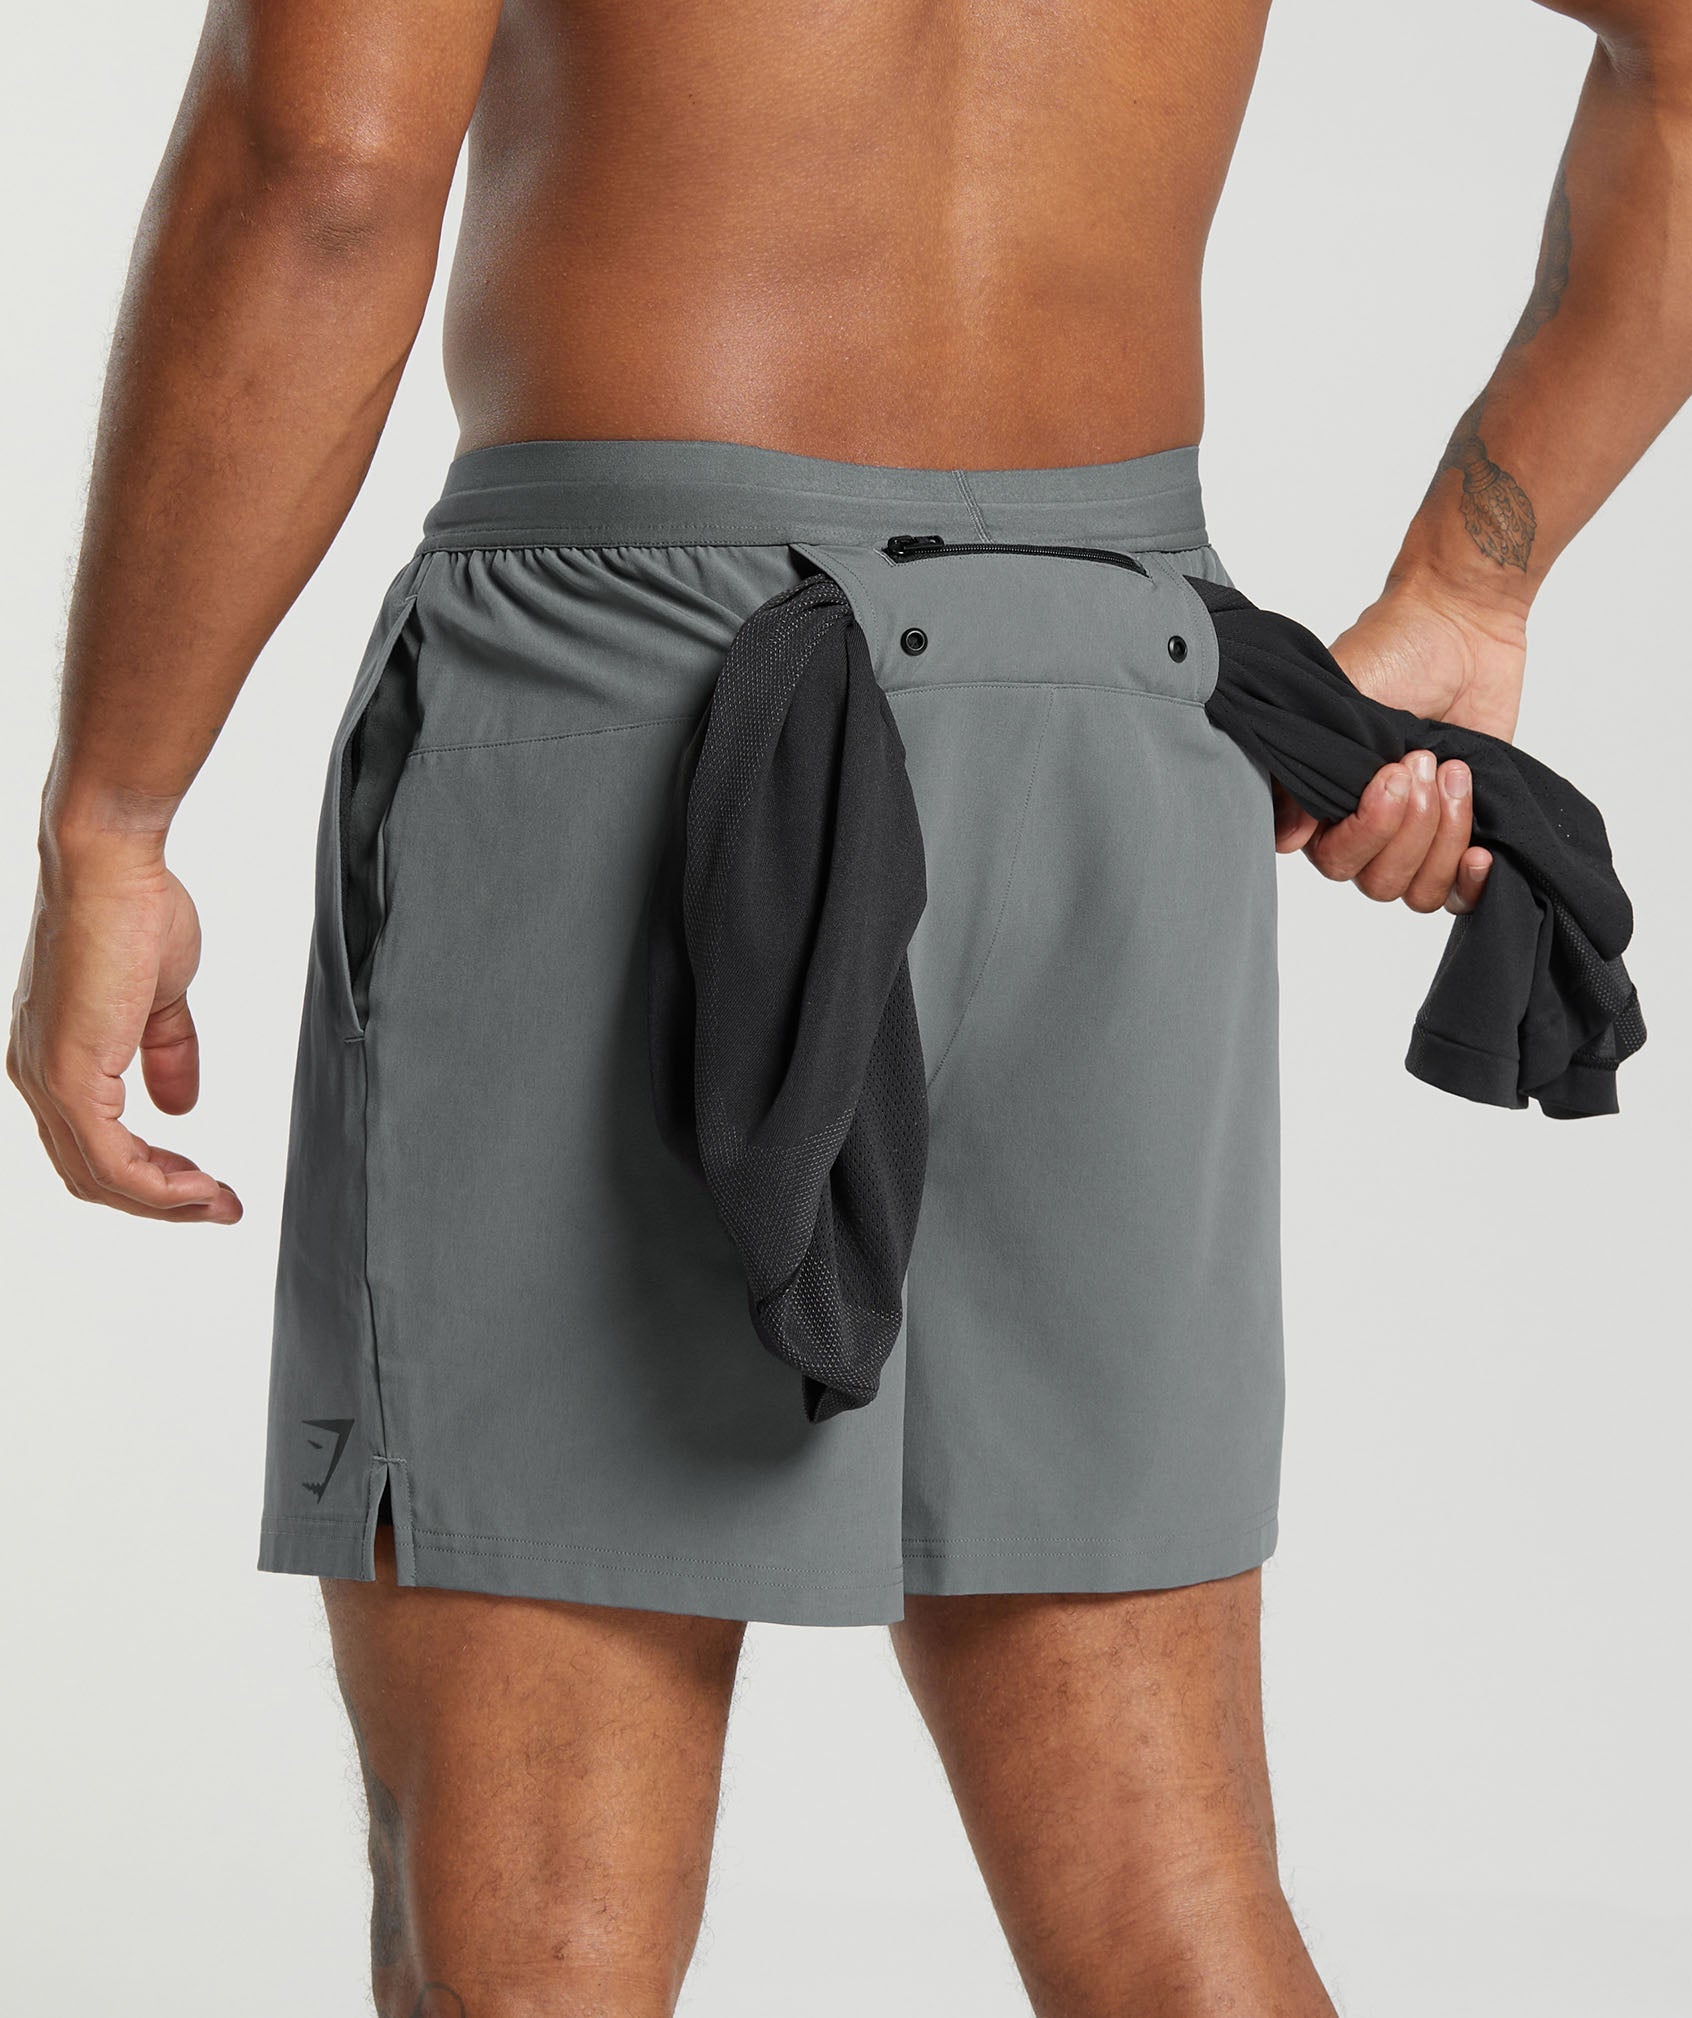 Land to Water 6" Shorts in Pitch Grey - view 8